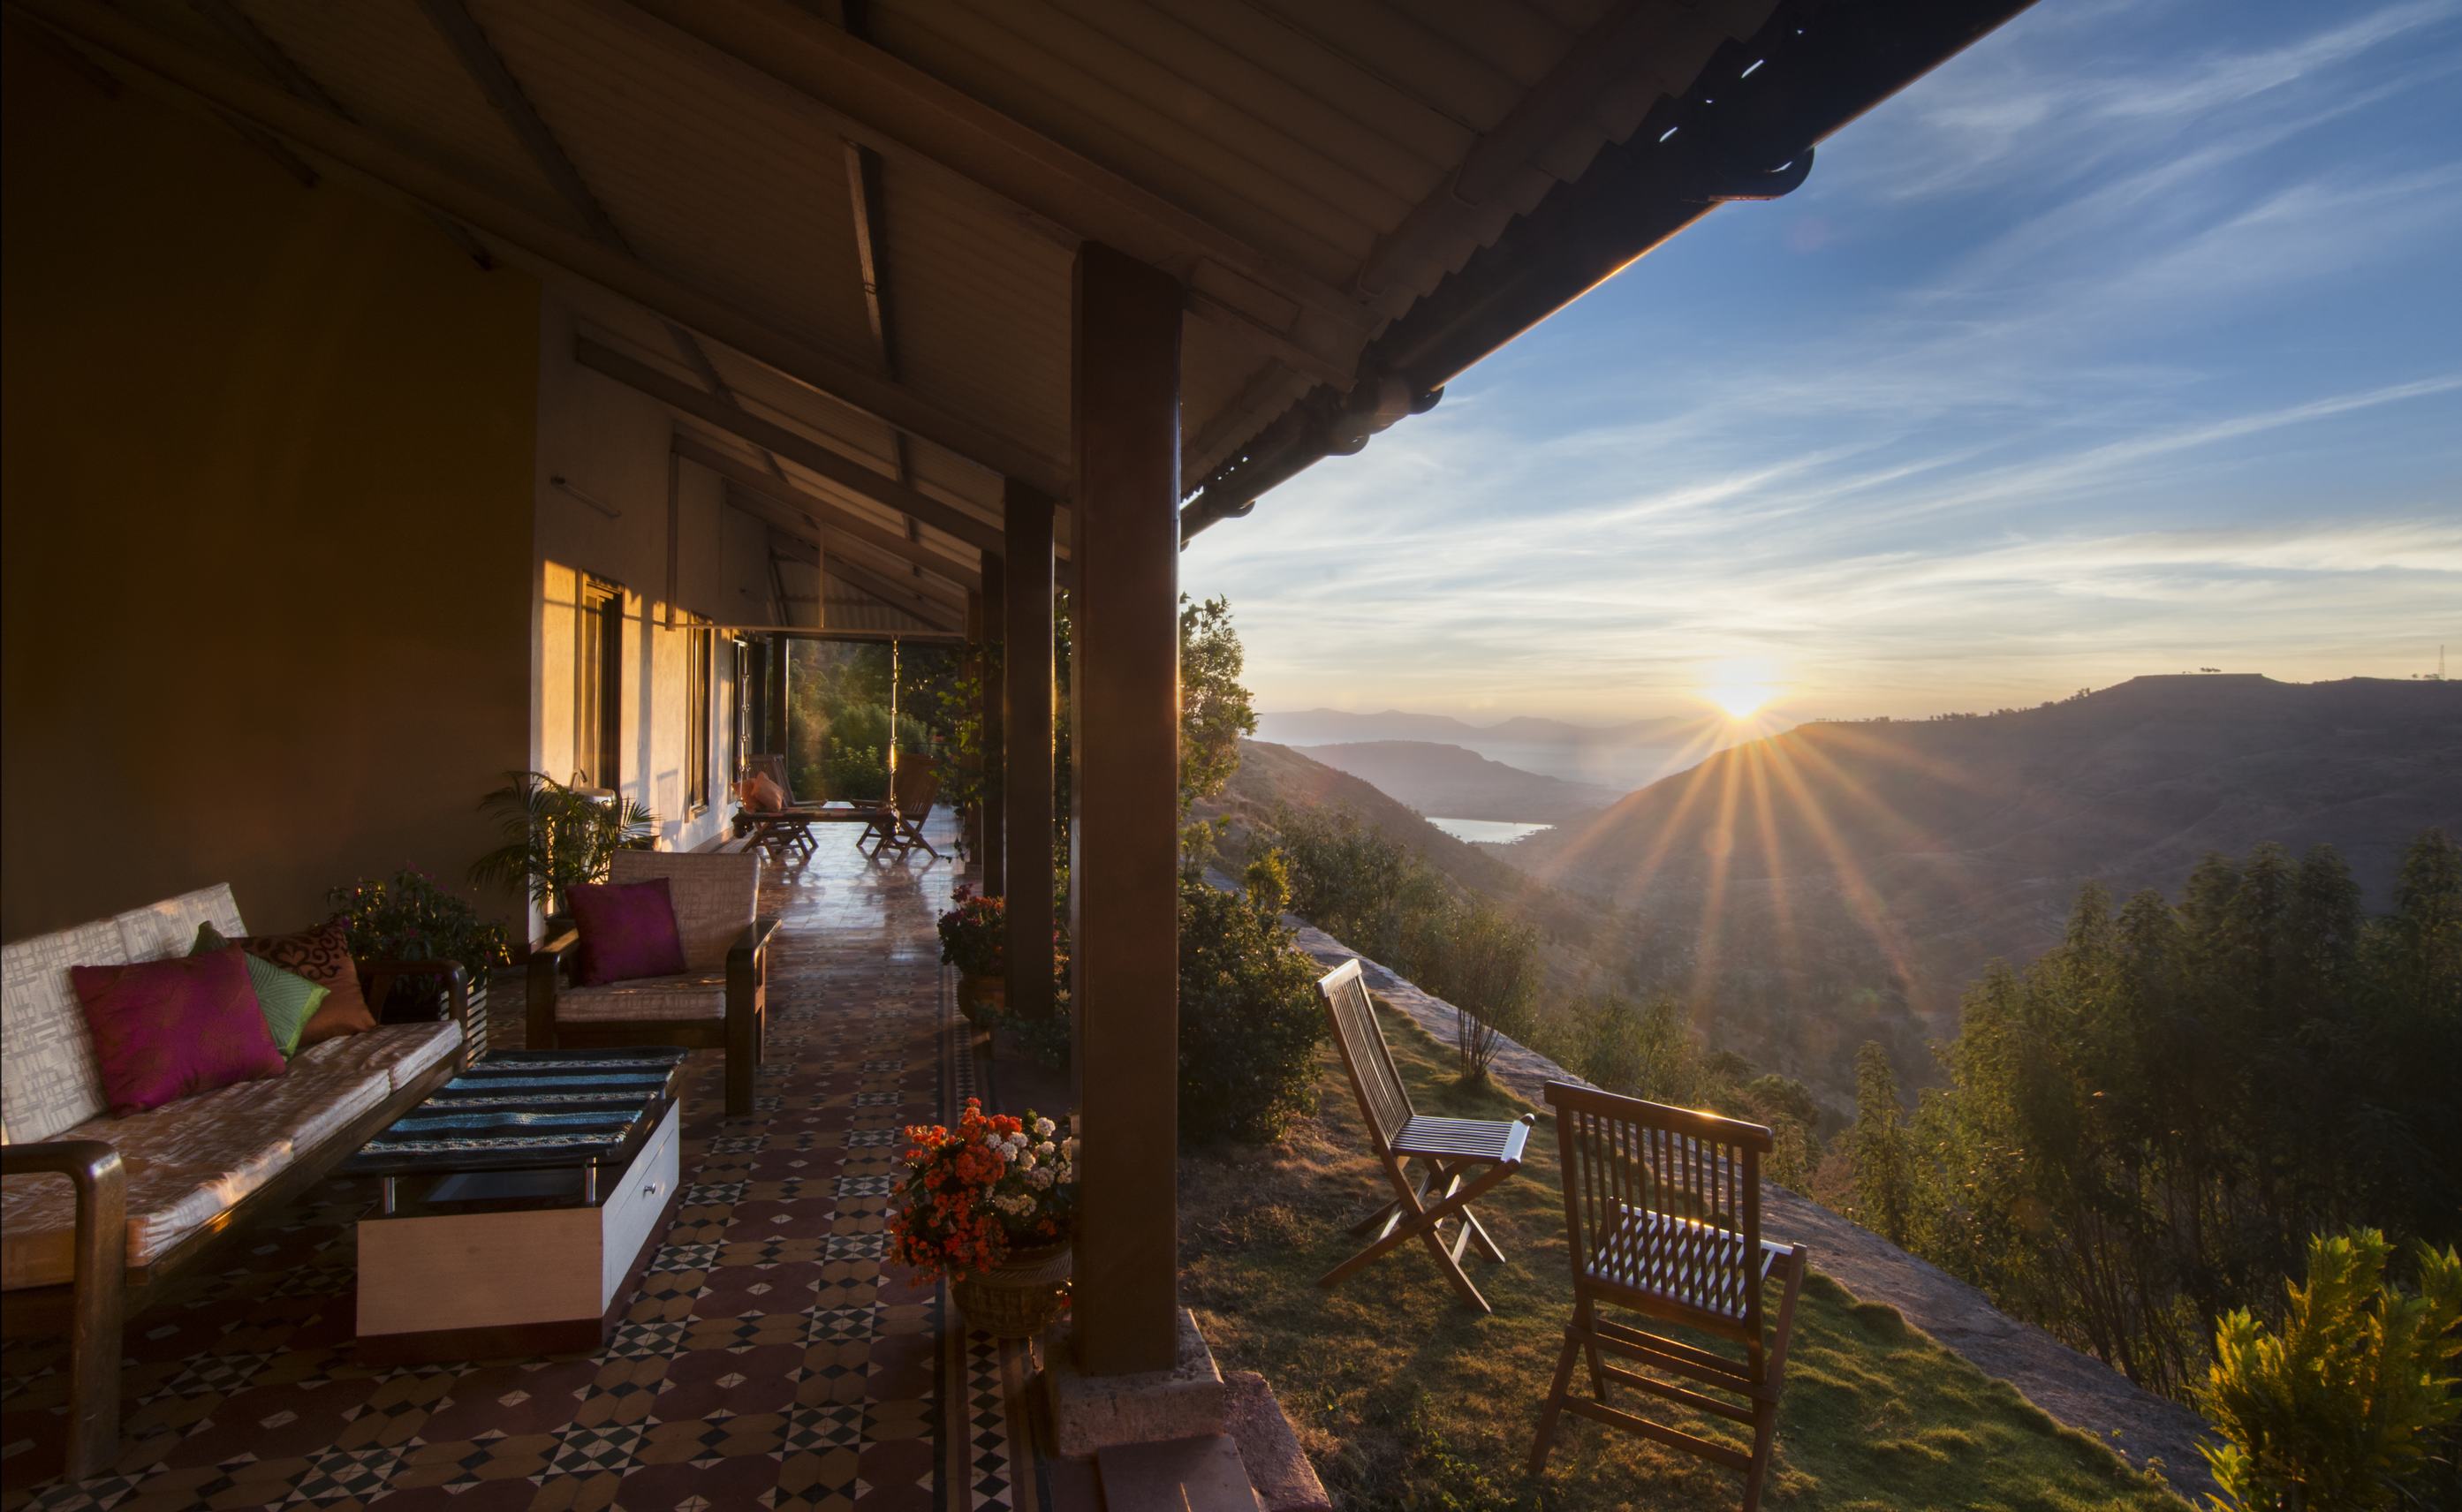 Imagine waking up to a view like this in Panchgani!